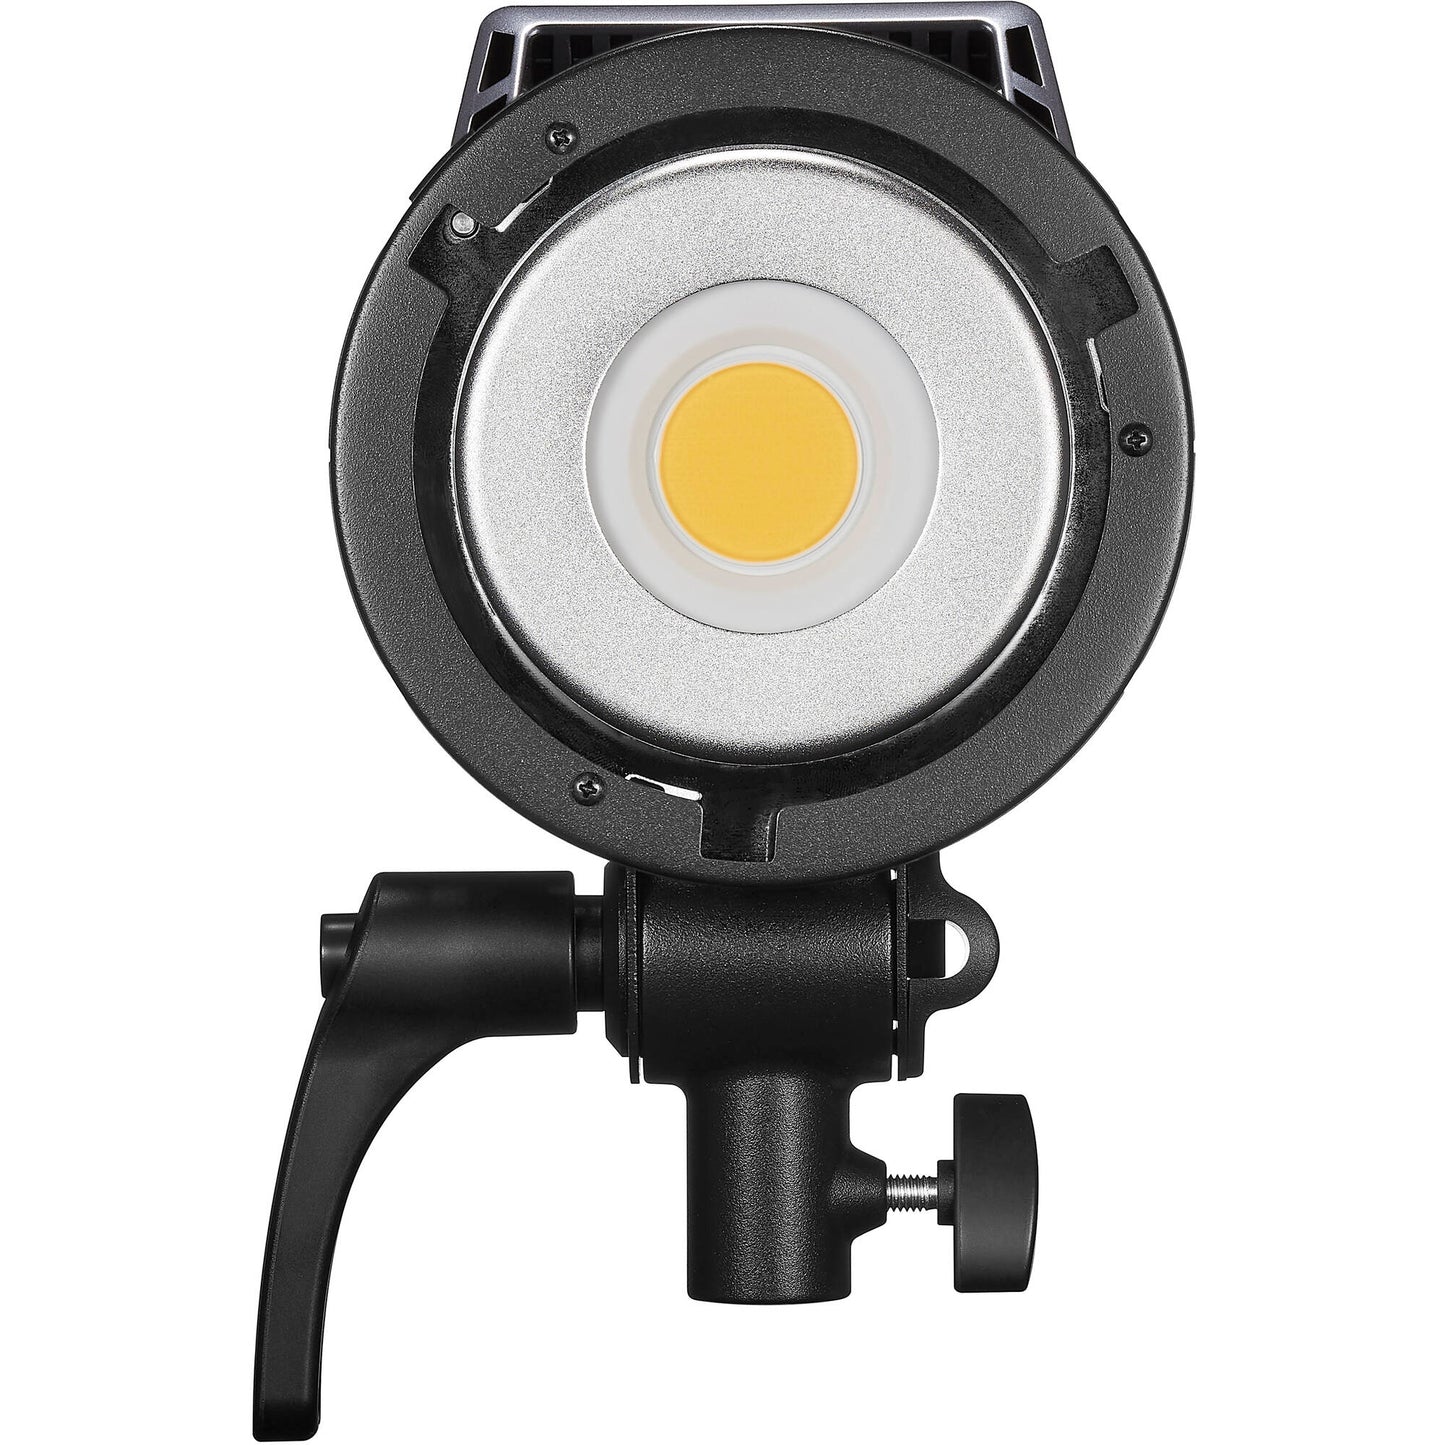 Godox Litemons LA200D Studio LED Video Light (Daylight) 230W with 5600K Color Temperature, Bluetooth Wireless Control, 8 FX for Vlog Photography